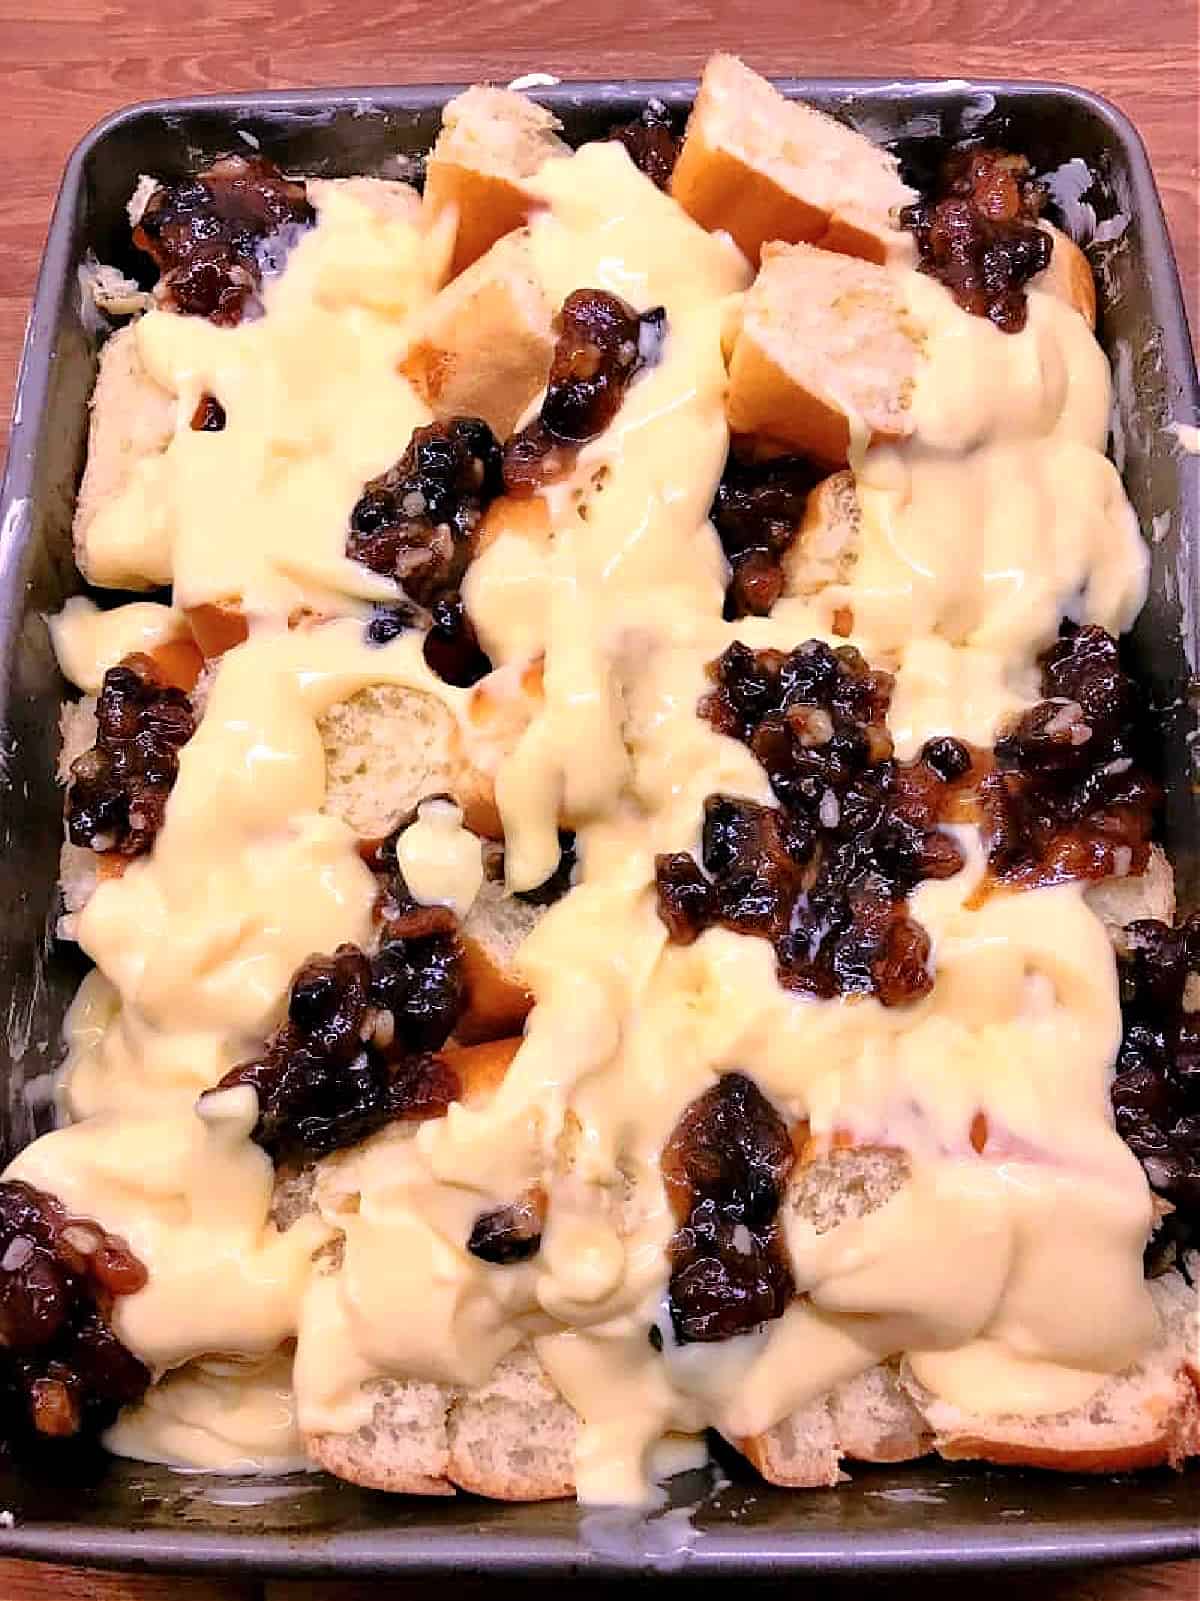 Brioche and mincemeat with custard in an oven dish, before baking.